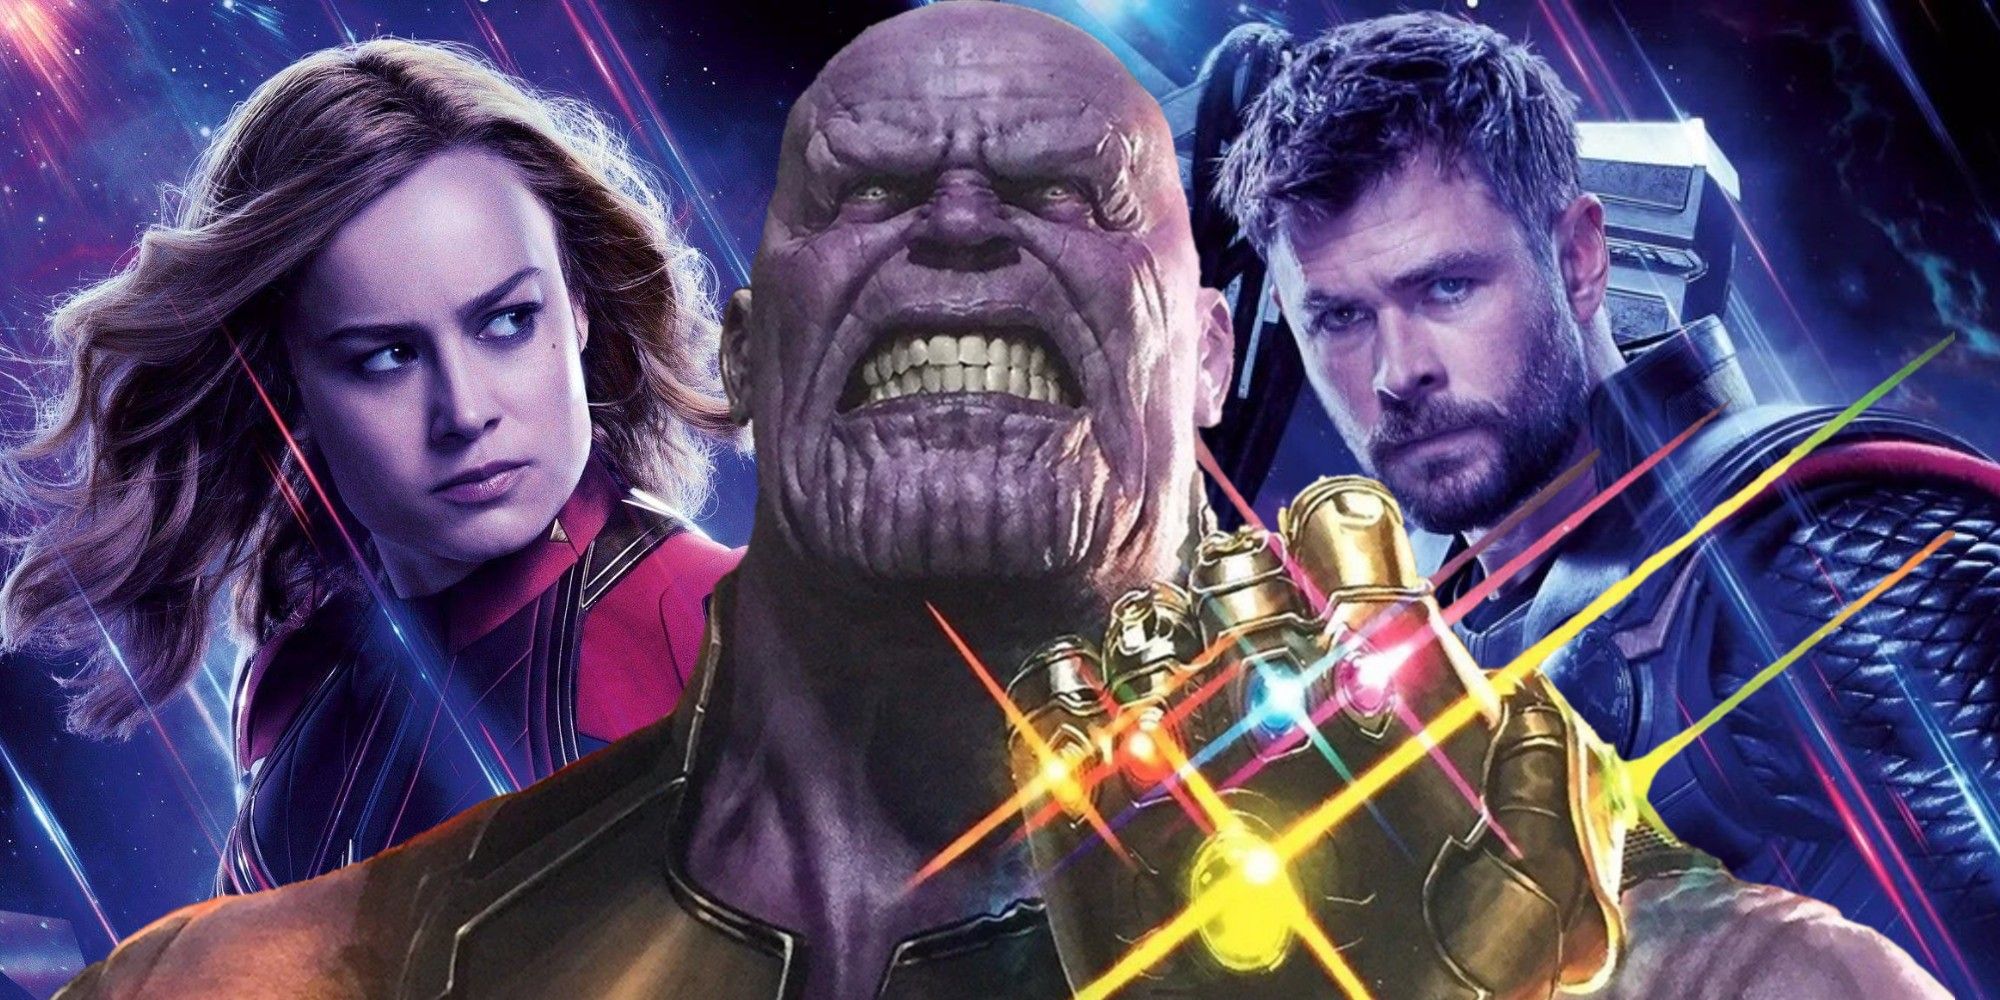 The MCU's Captain Marvel and Thor behind Thanos with the infinity gauntlet